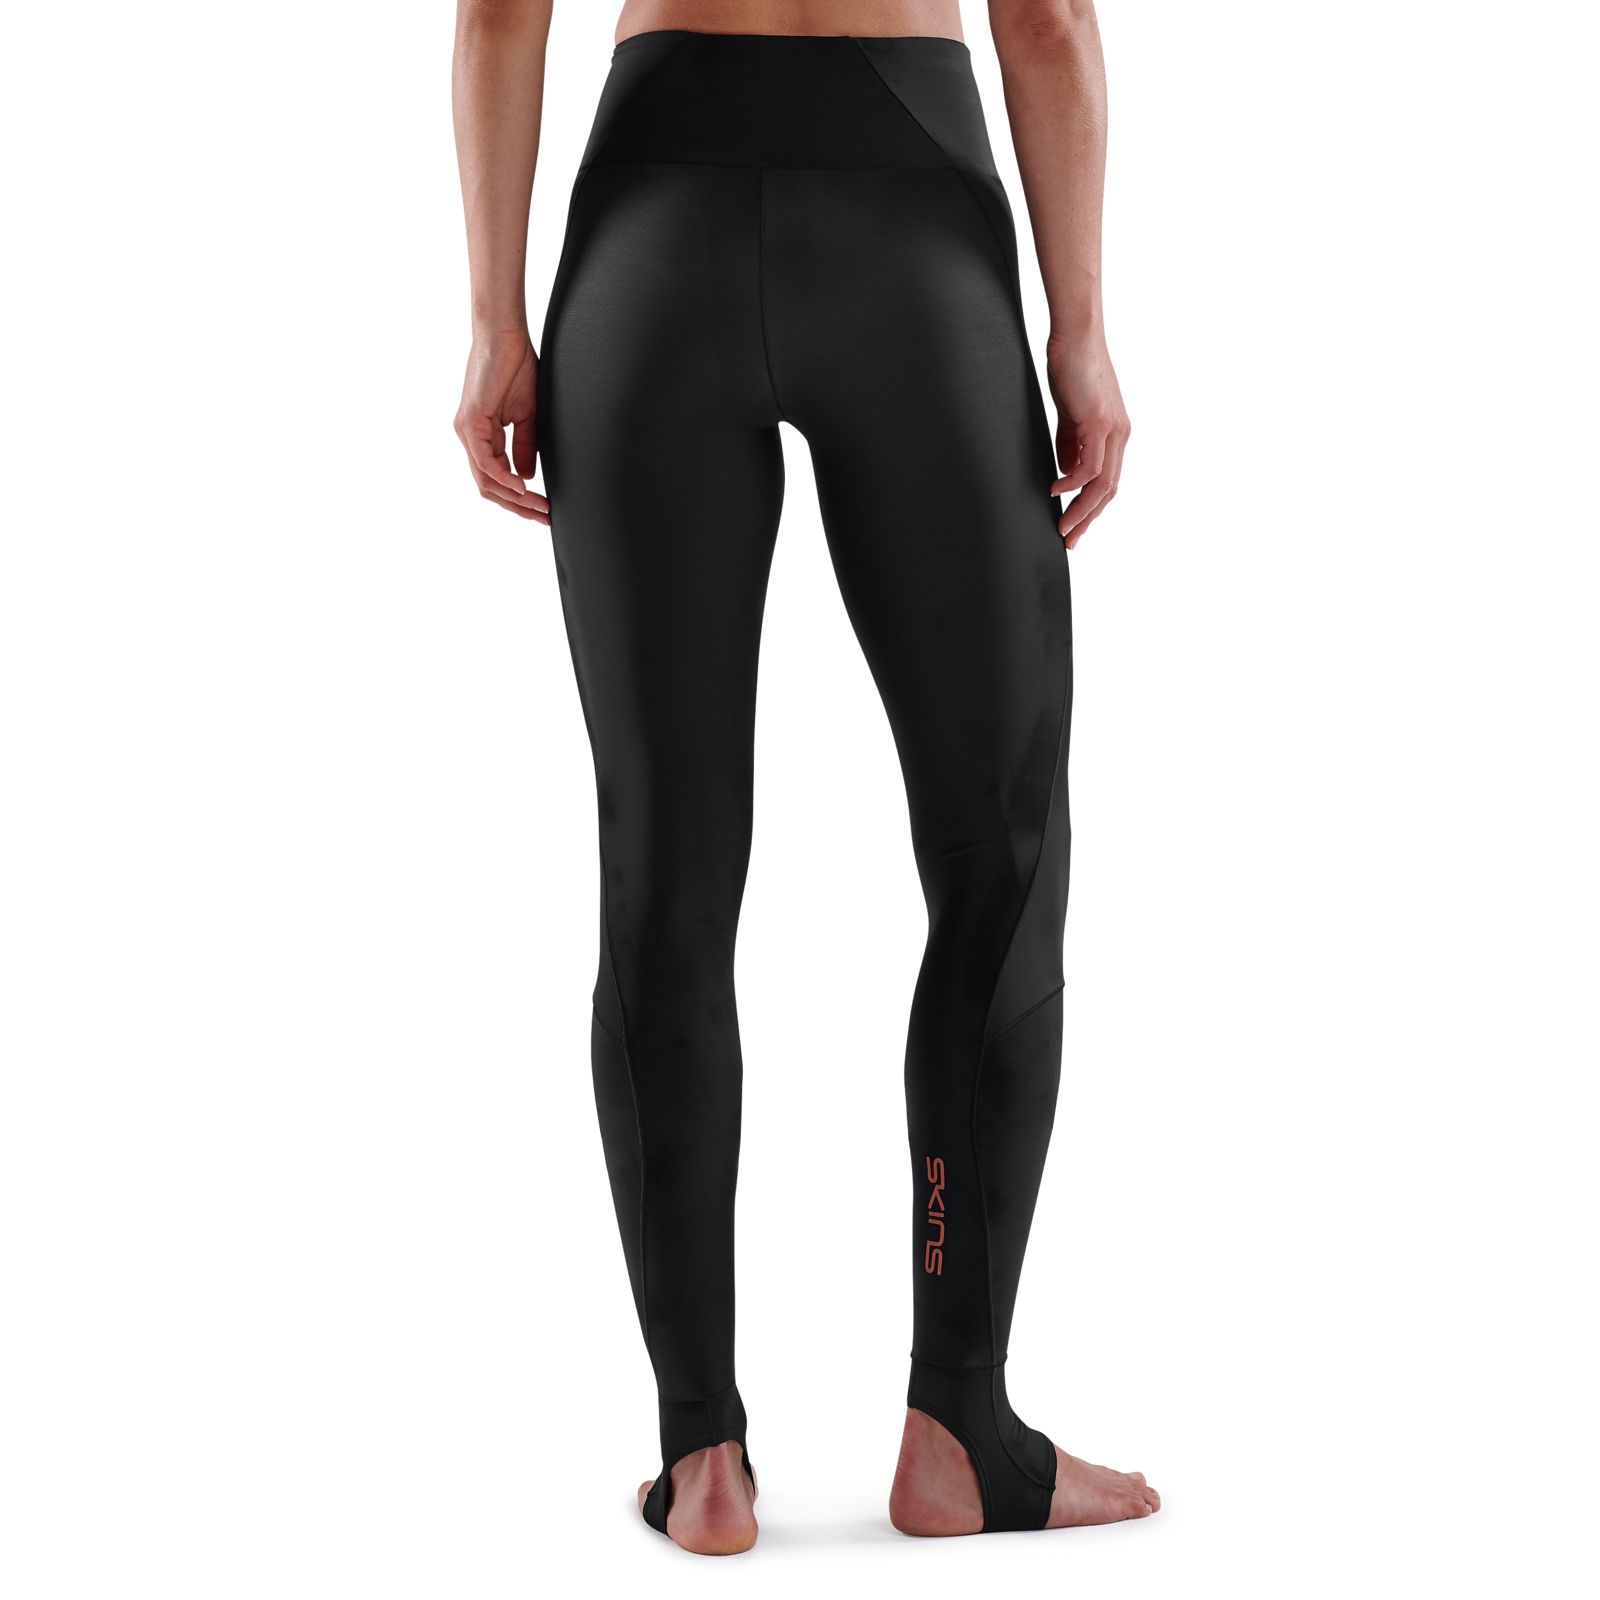 Sub Sports Elite R+ recovery compression leggings review vs Skins travel recovery  tights 